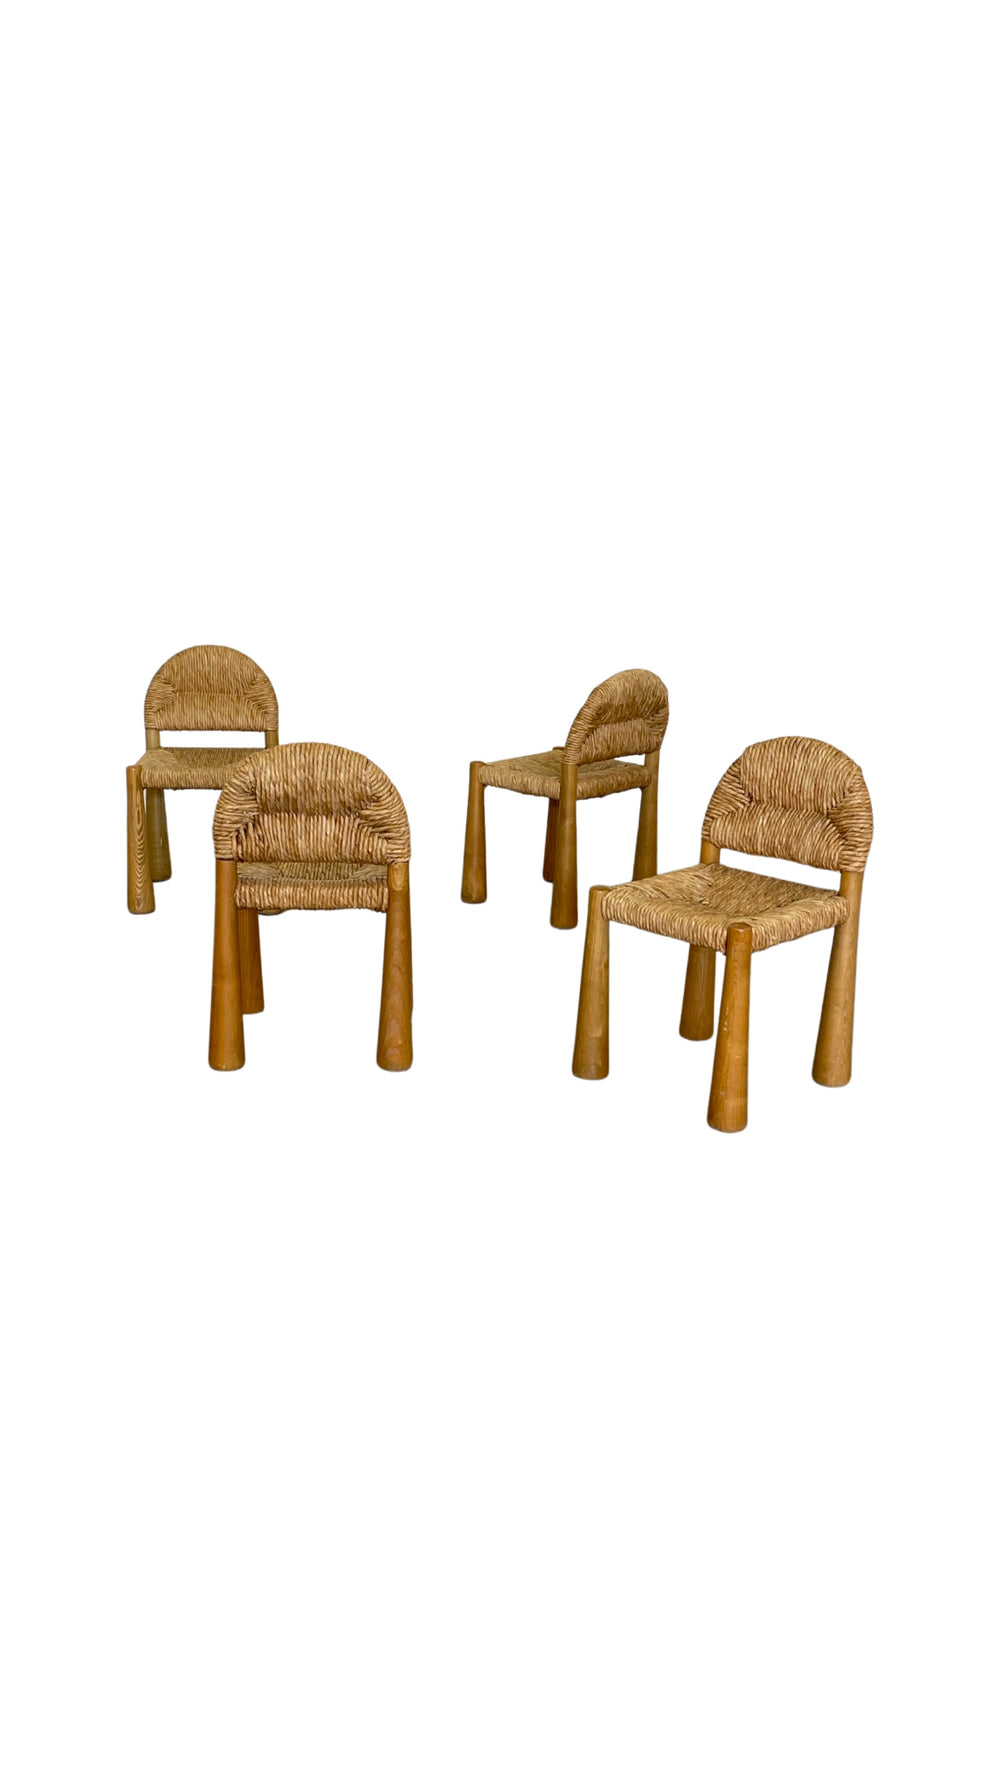 Alessandro Becchi rare matched set of four solid pine "Toscanolla" dining chairs by for Giovanetti, Italy, 1970s